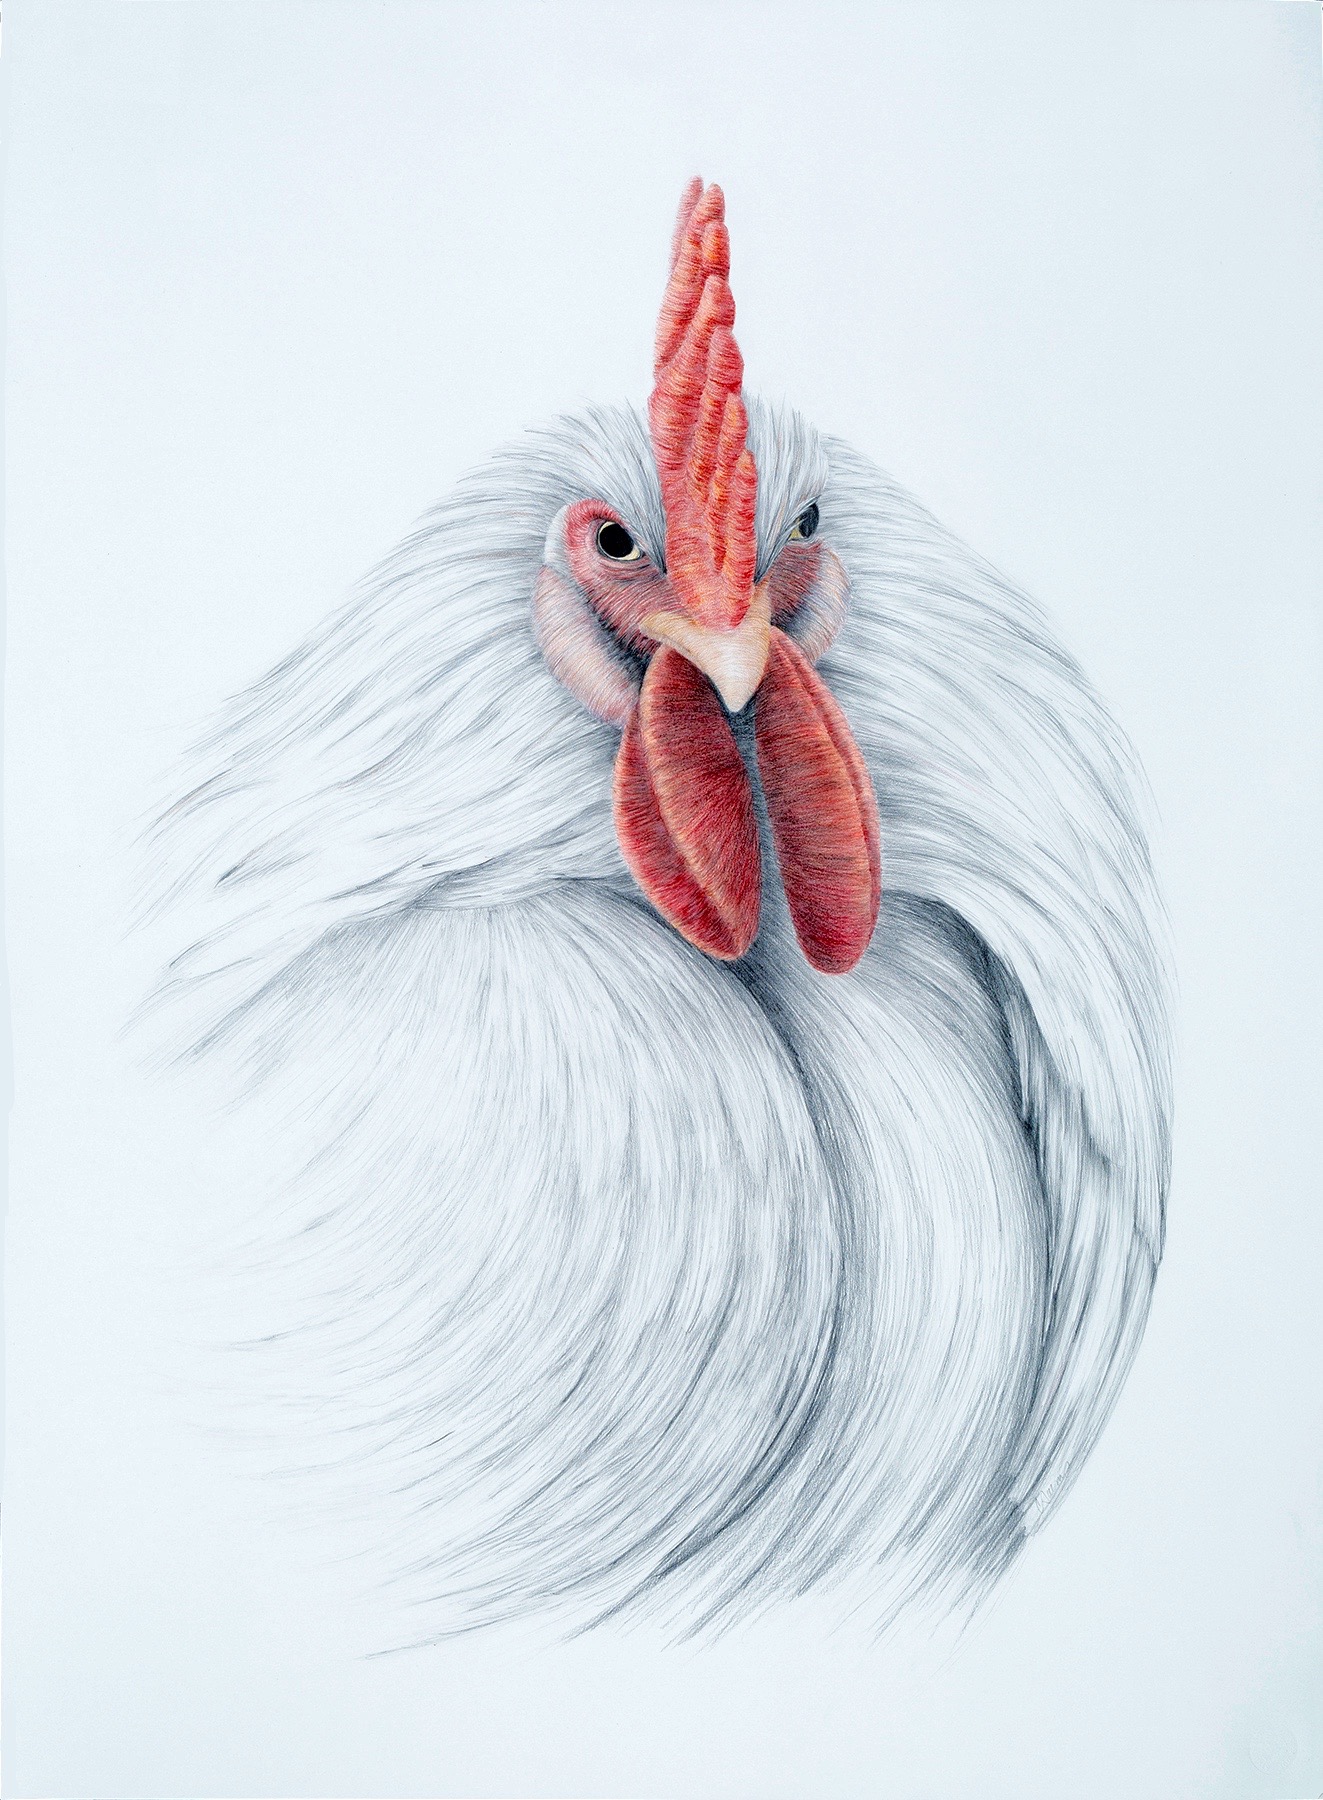   KEEPERS OF MY SECRETS: CHICKEN   Graphite, colored pencil  25" x 17.75" 